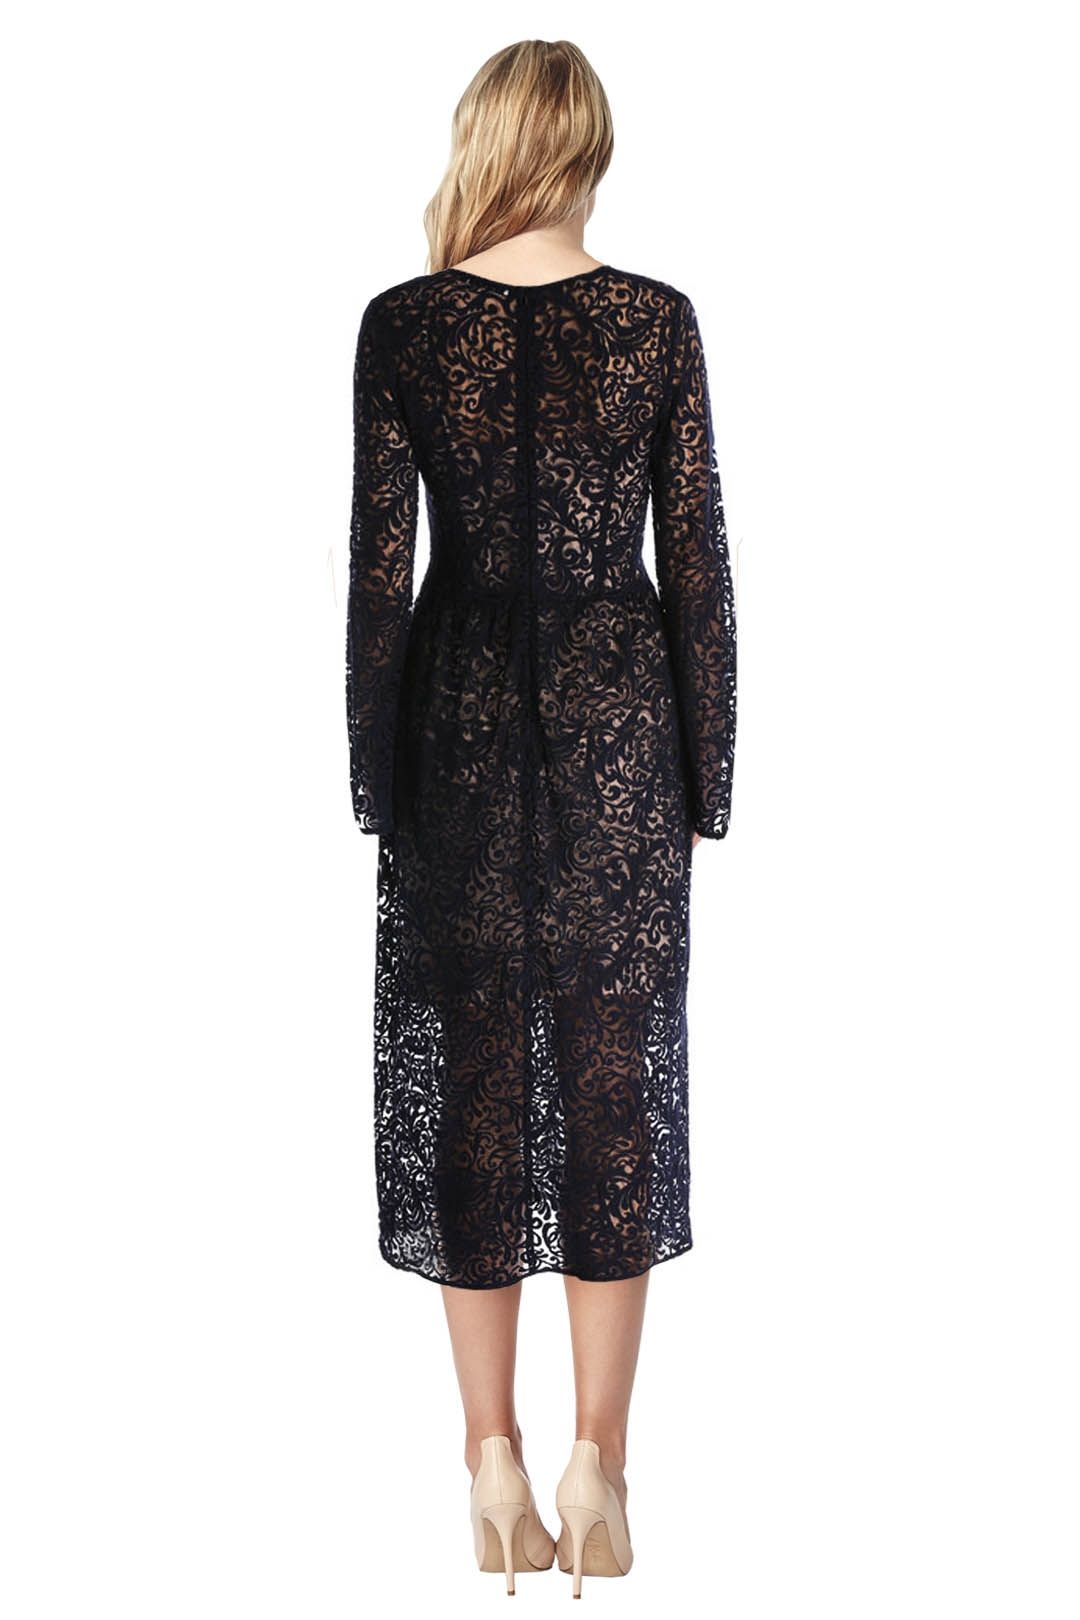 Yeojin Bae - Embroidered Lace Marianne Dress - Black Lace - Back